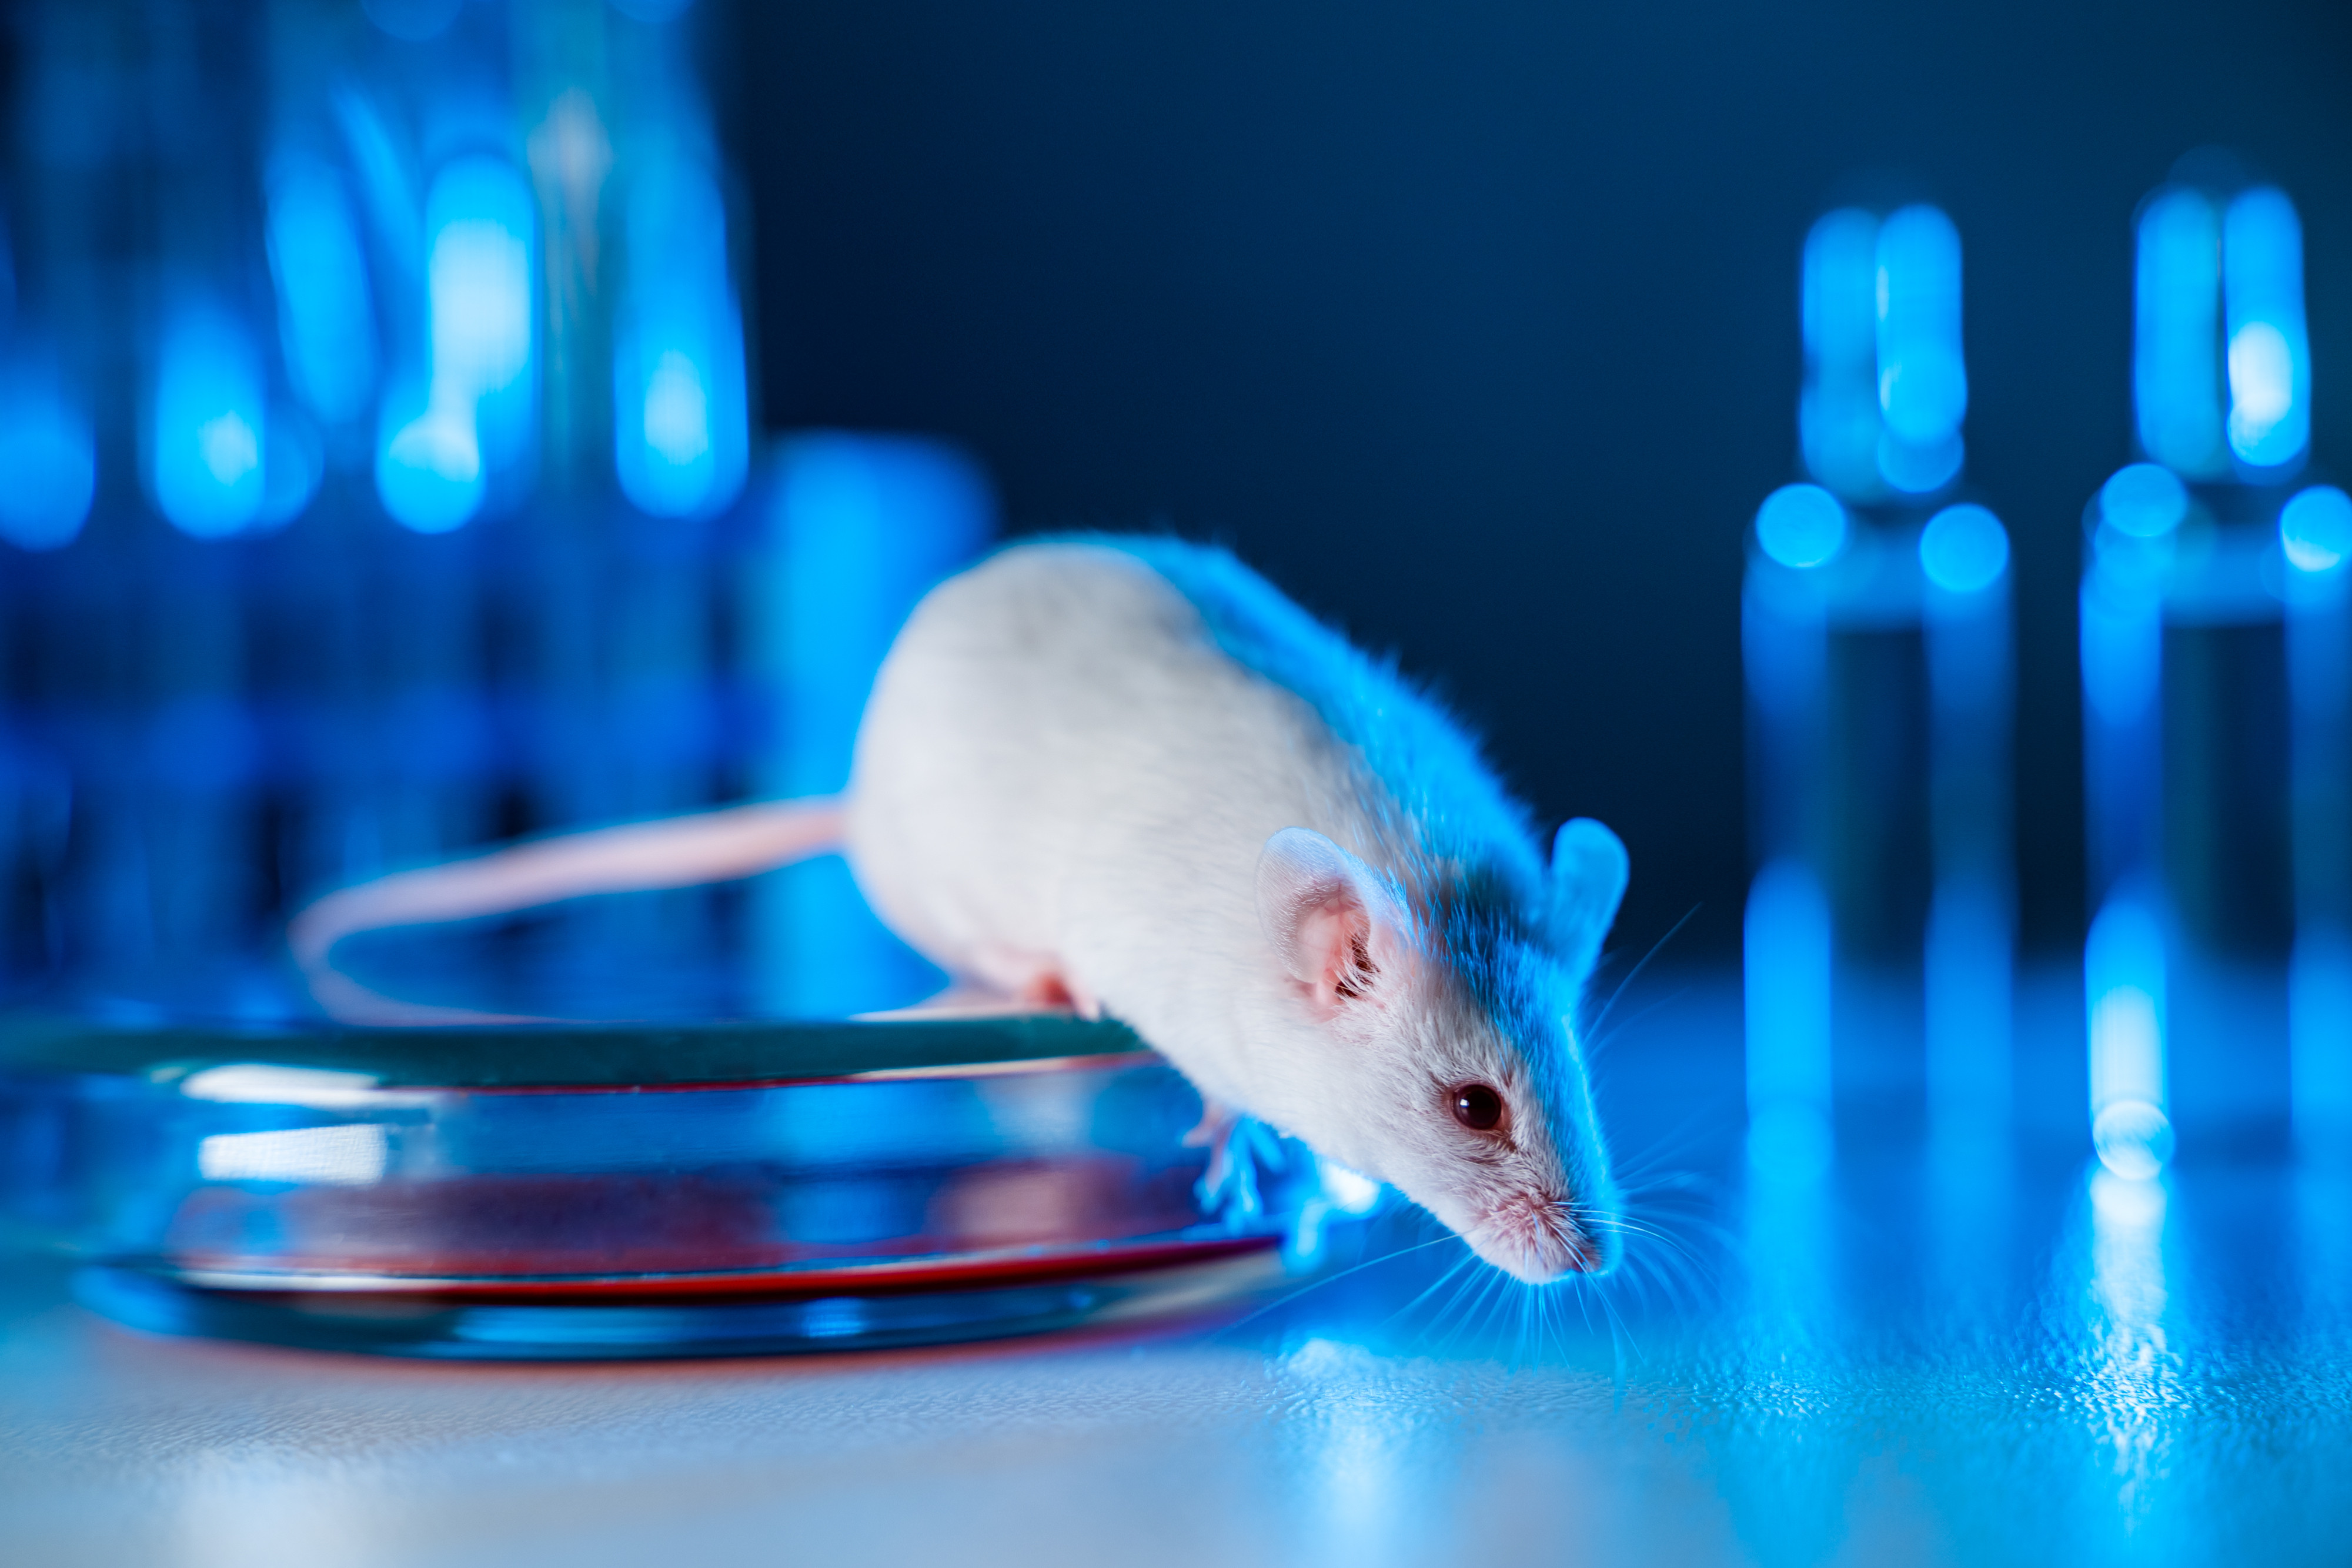 Scientists in China said the results of their study using mice could have broad therapeutic applications. Photo: Shutterstock